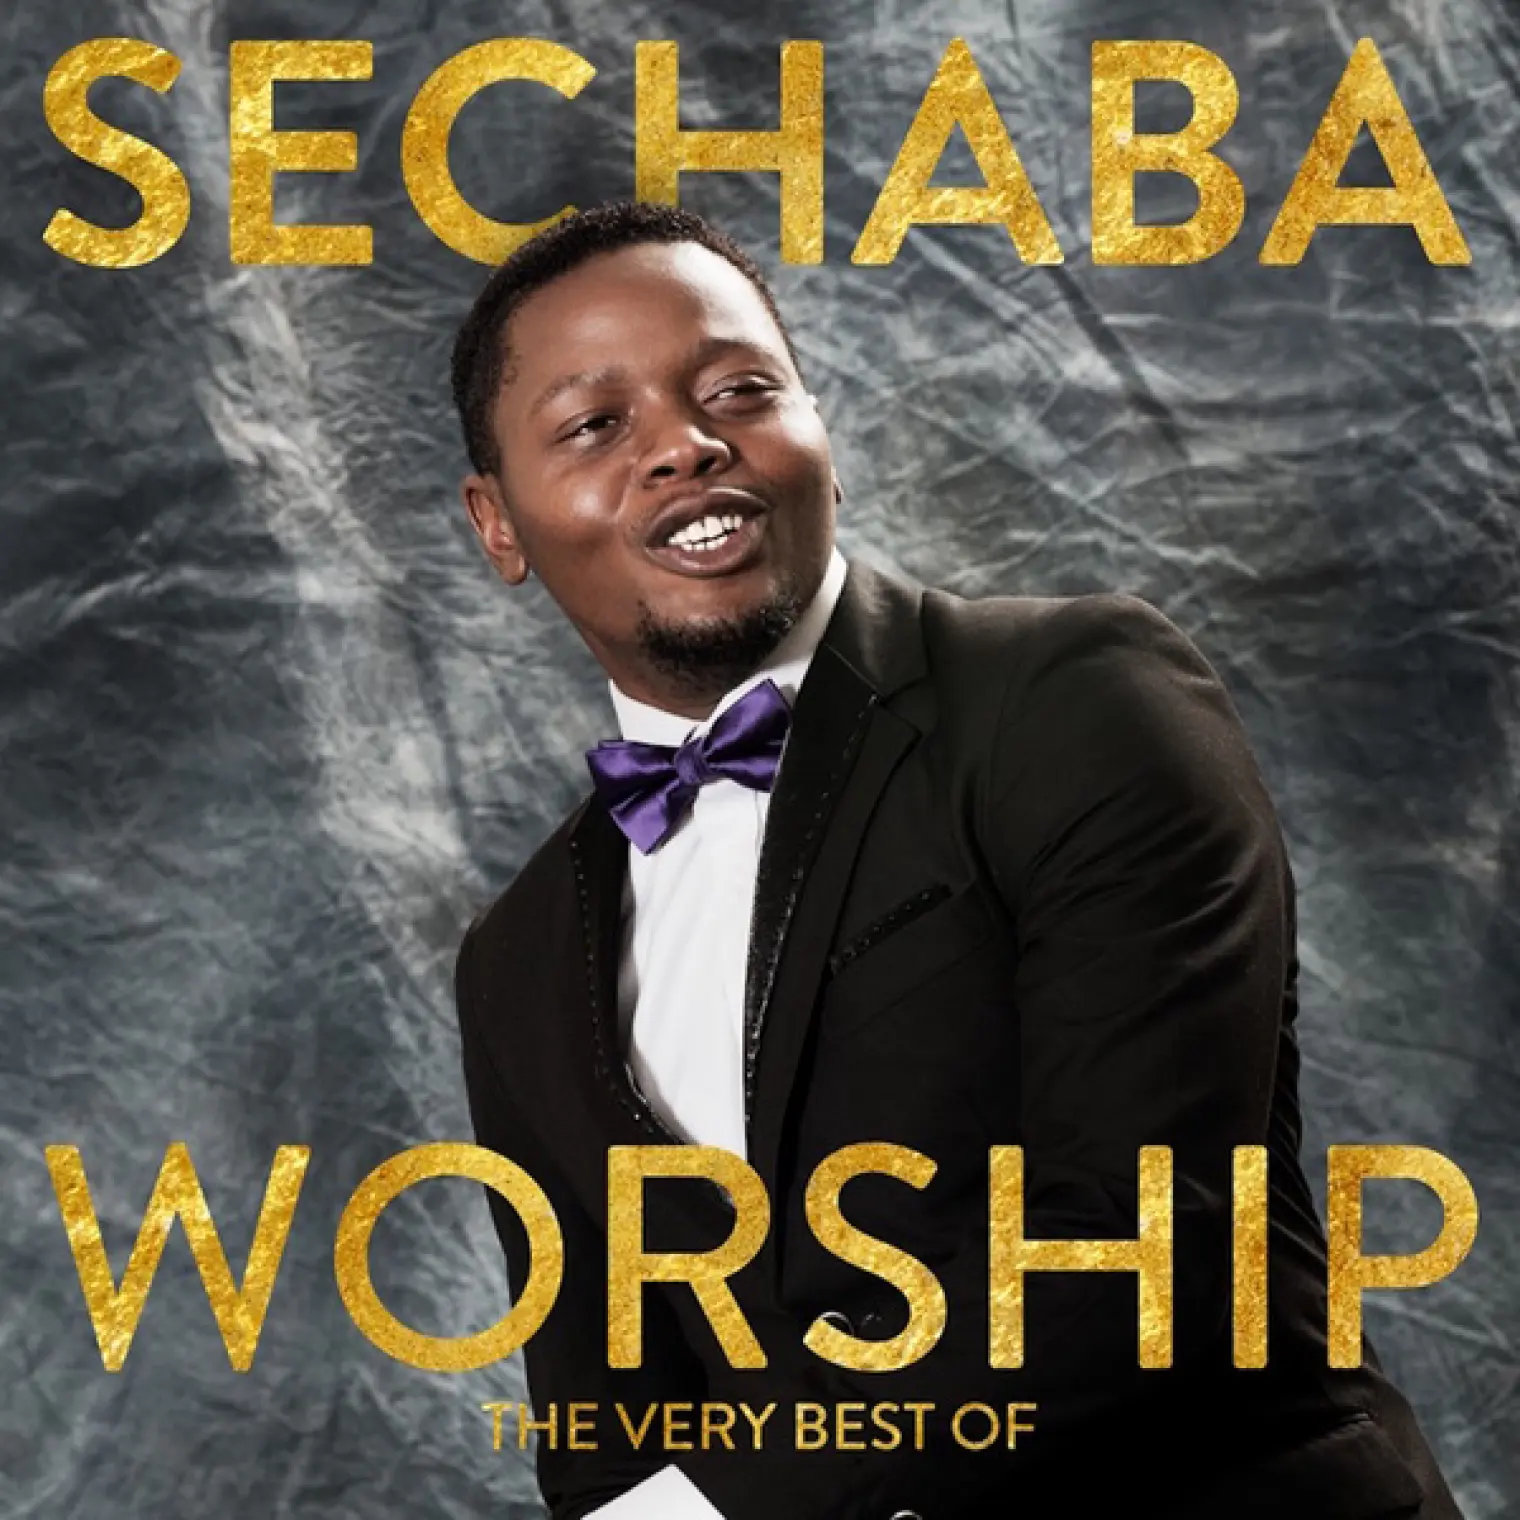 Worship The Very Best Of Vol 2 -  Sechaba 